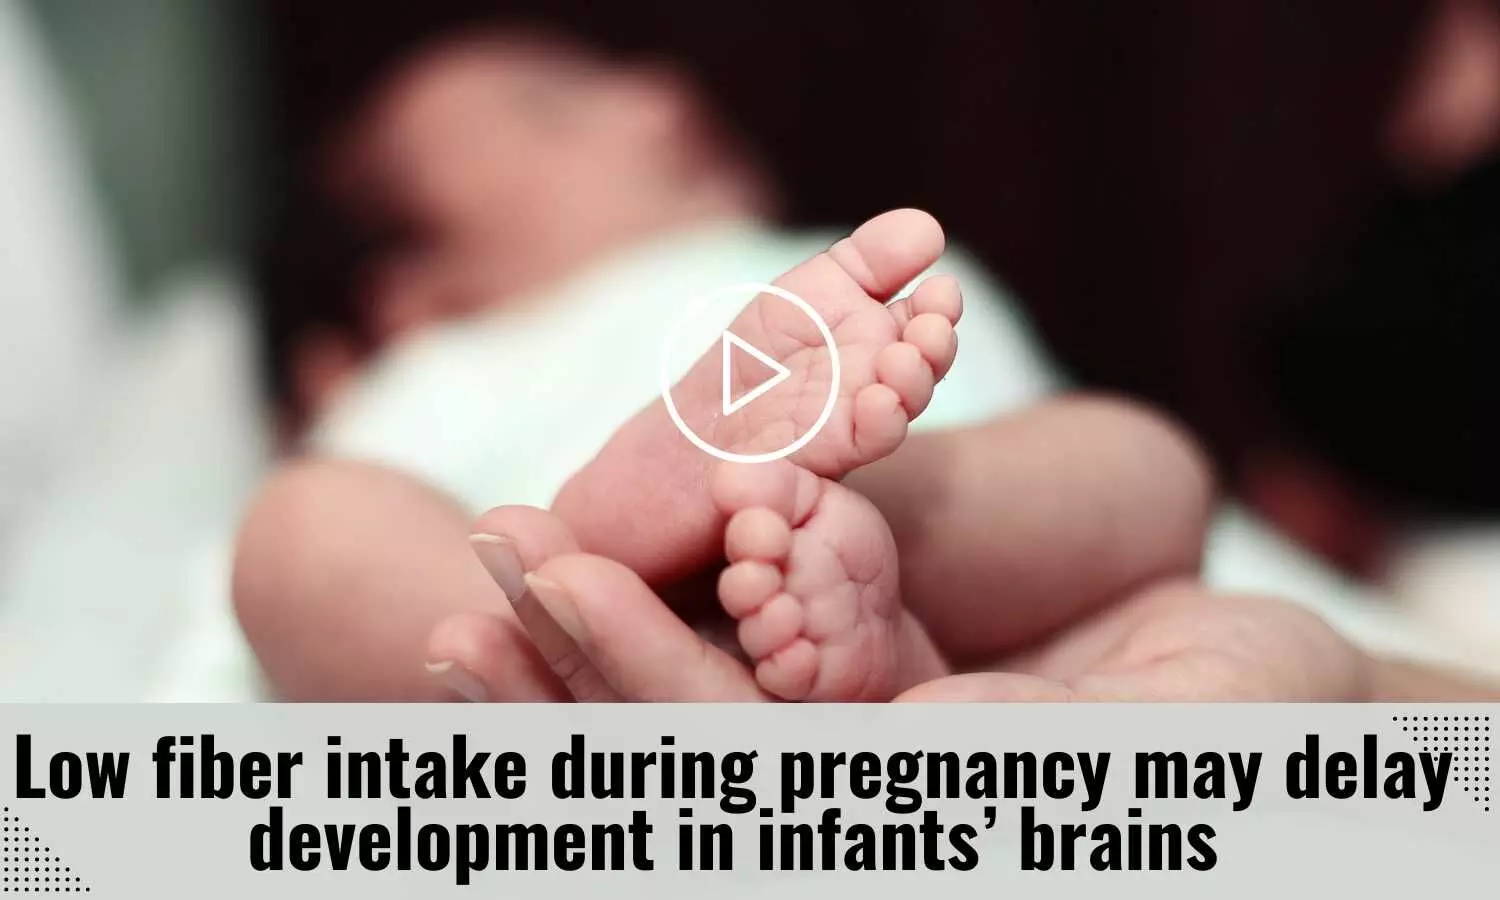 Low fiber intake during pregnancy may delay development in infants brains